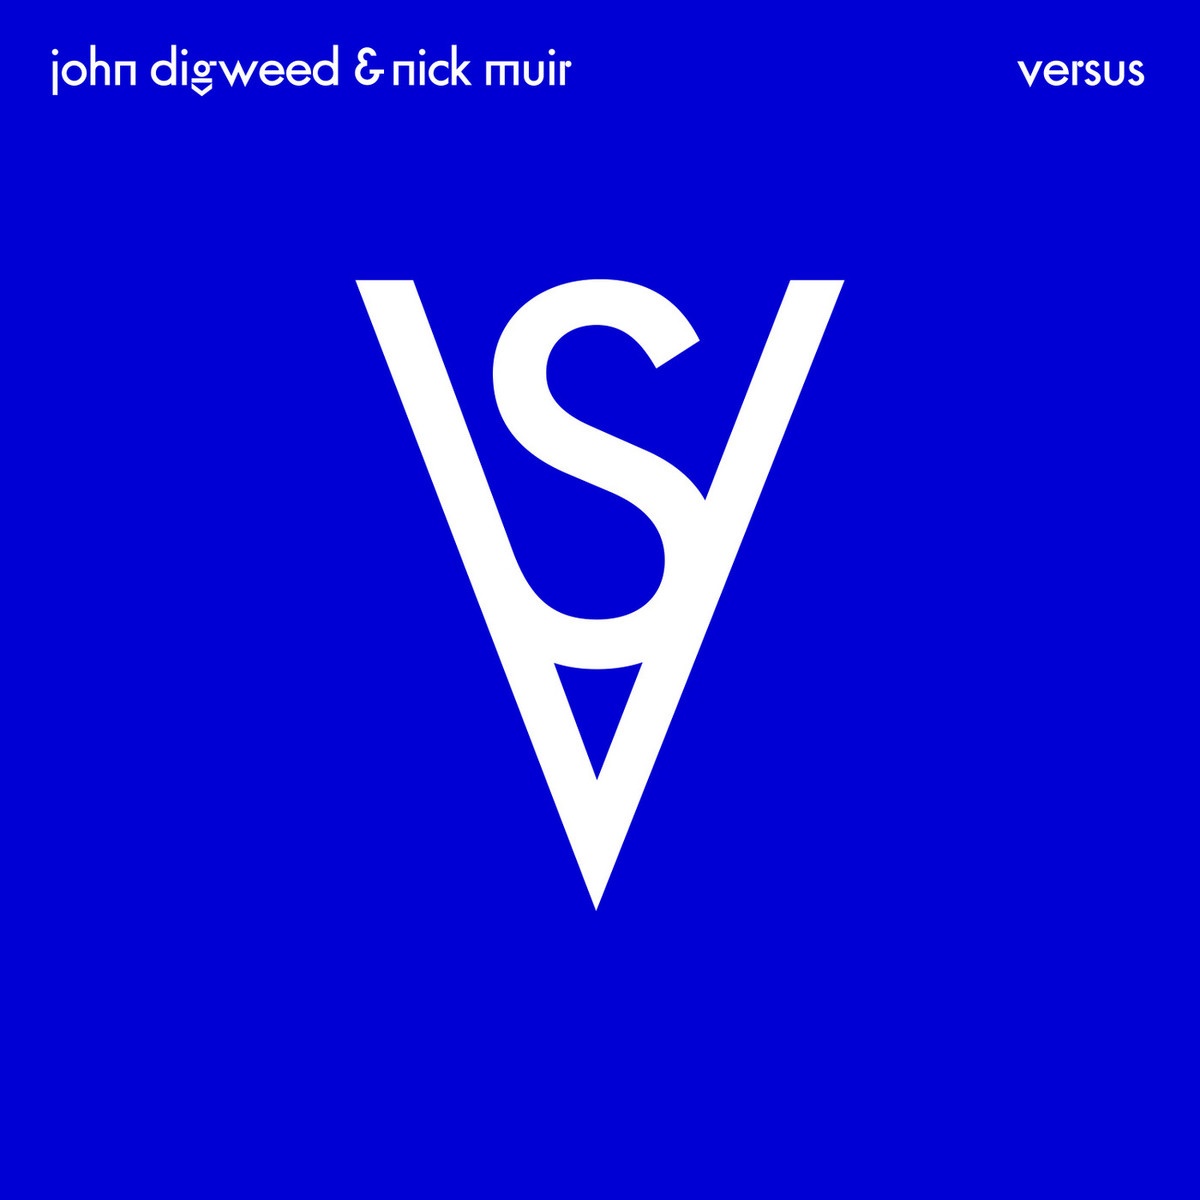 Versus (continuous mix version by John Digweed)